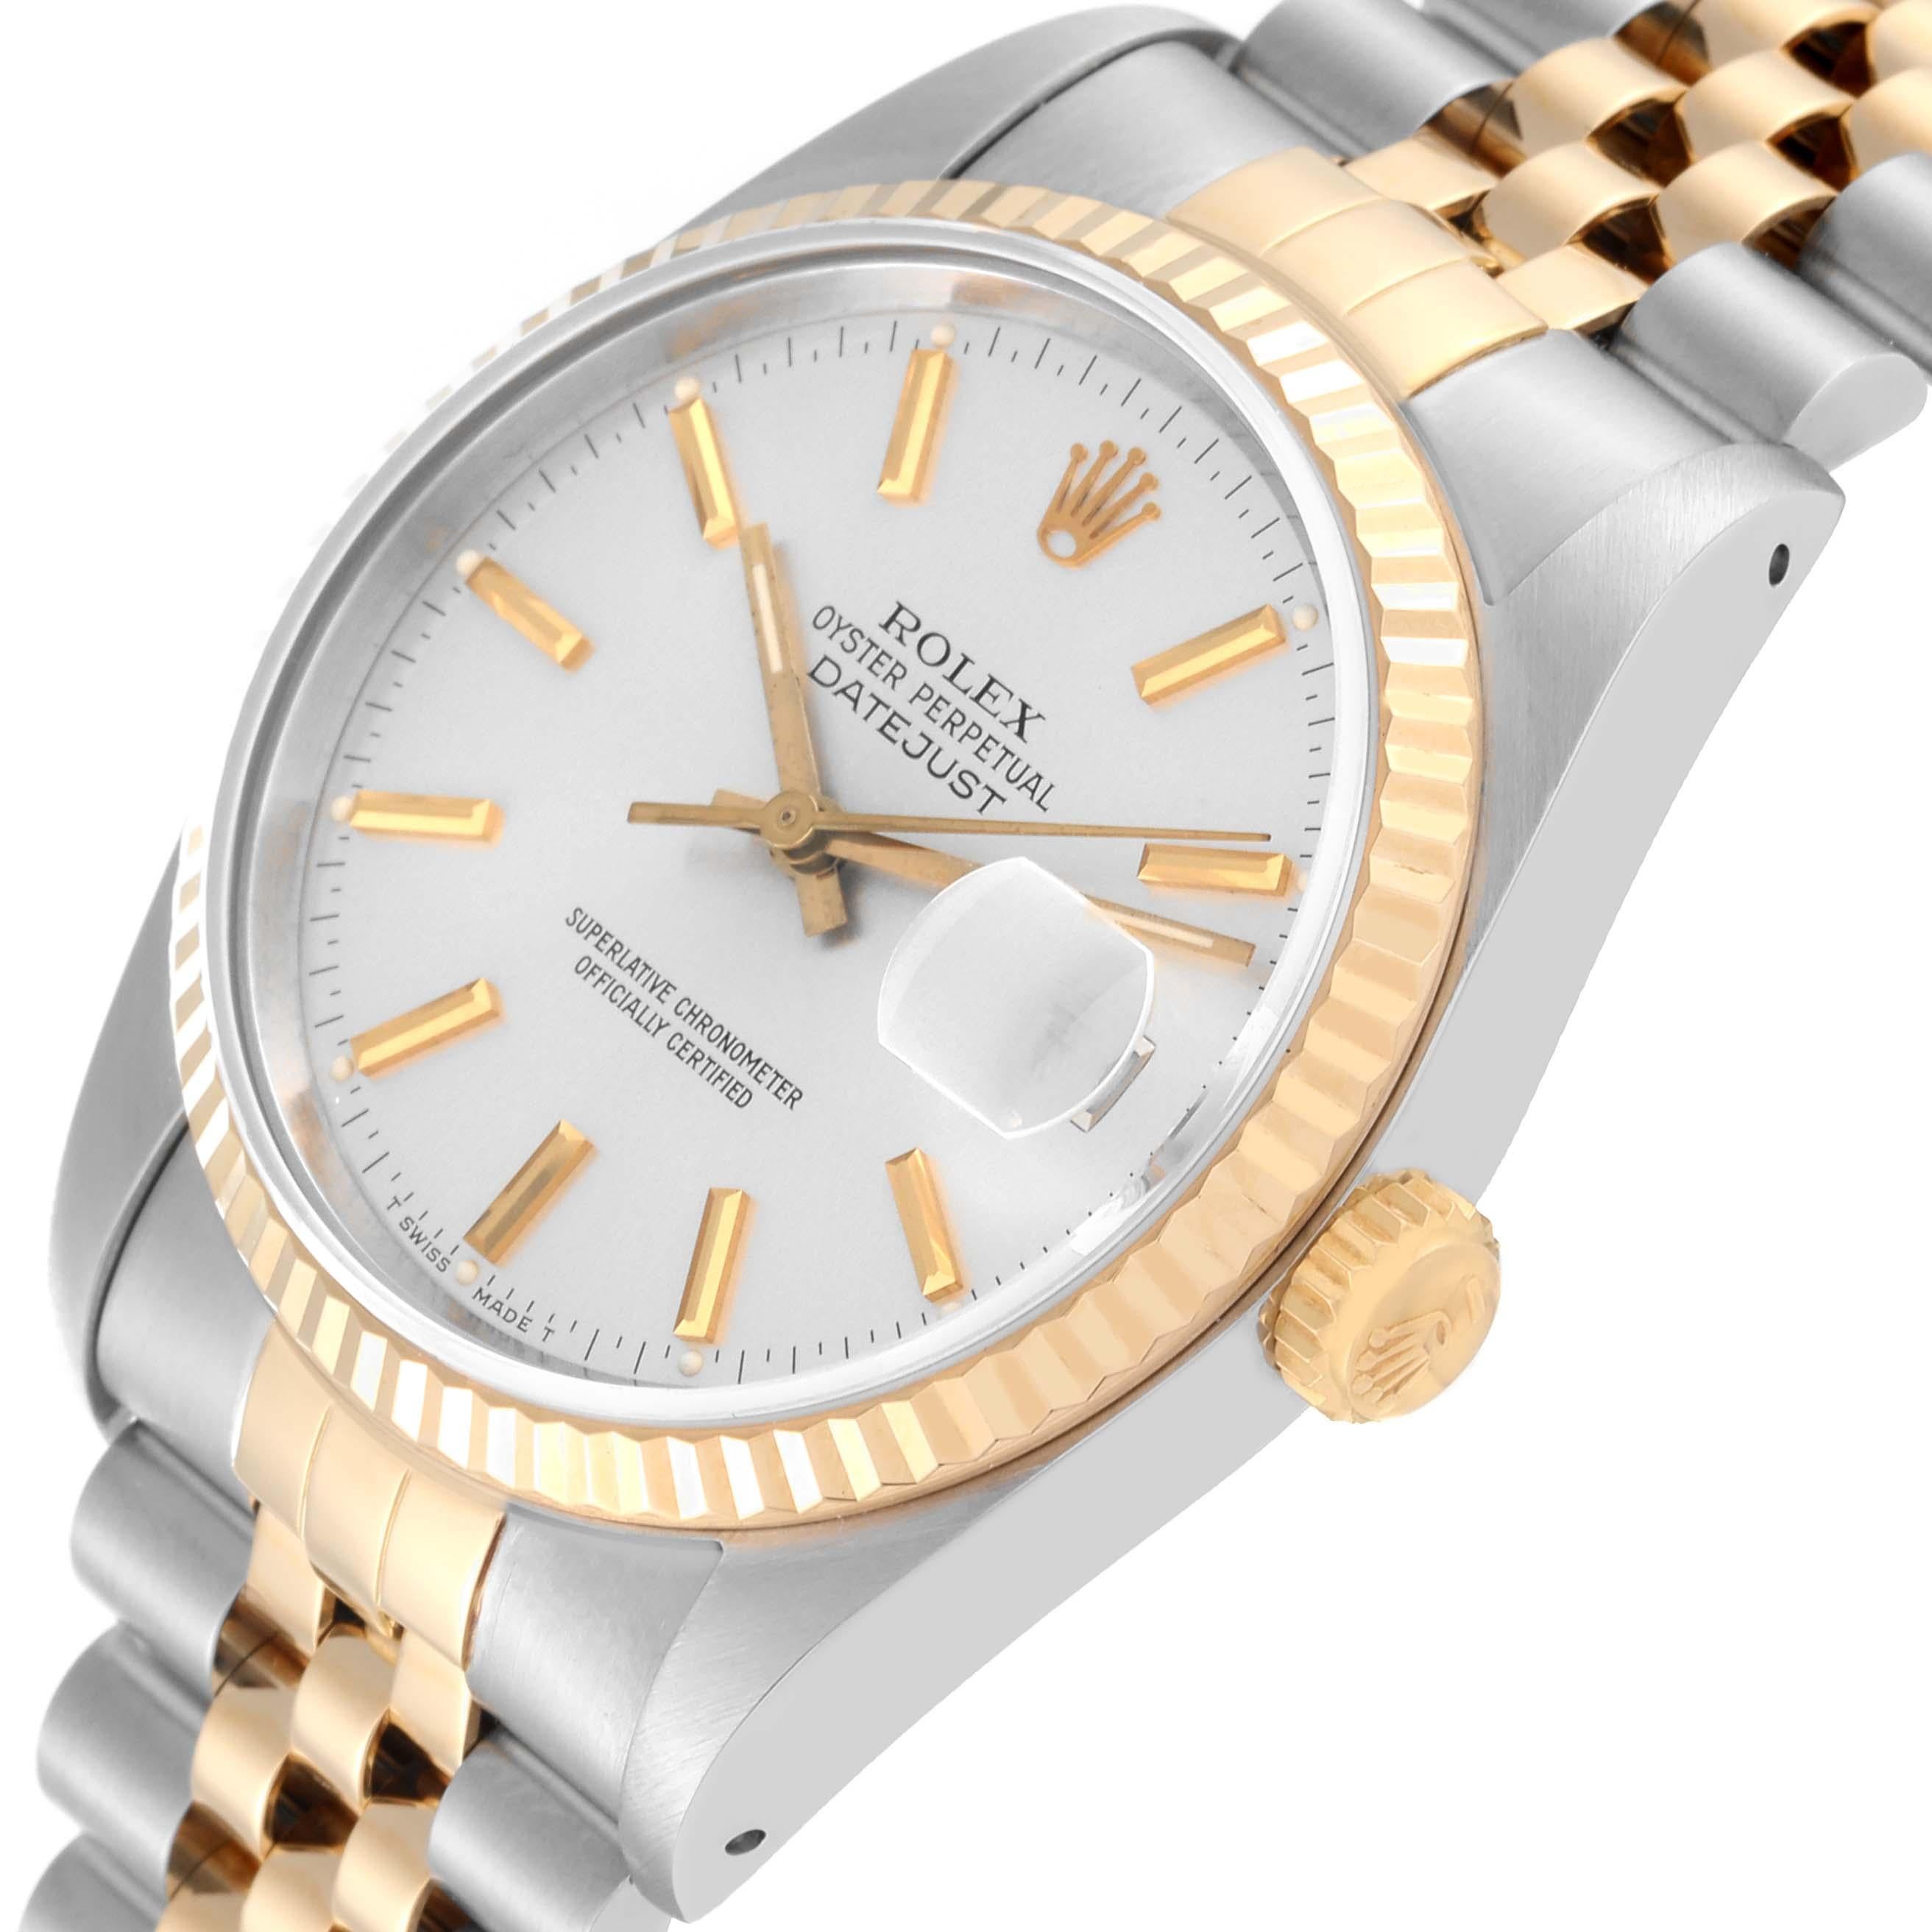 Rolex Datejust 36 Steel Yellow Gold Silver Dial Mens Watch 16233 Box Papers. Officially certified chronometer automatic self-winding movement. Stainless steel case 36 mm in diameter.  Rolex logo on an 18K yellow gold crown. 18k yellow gold fluted